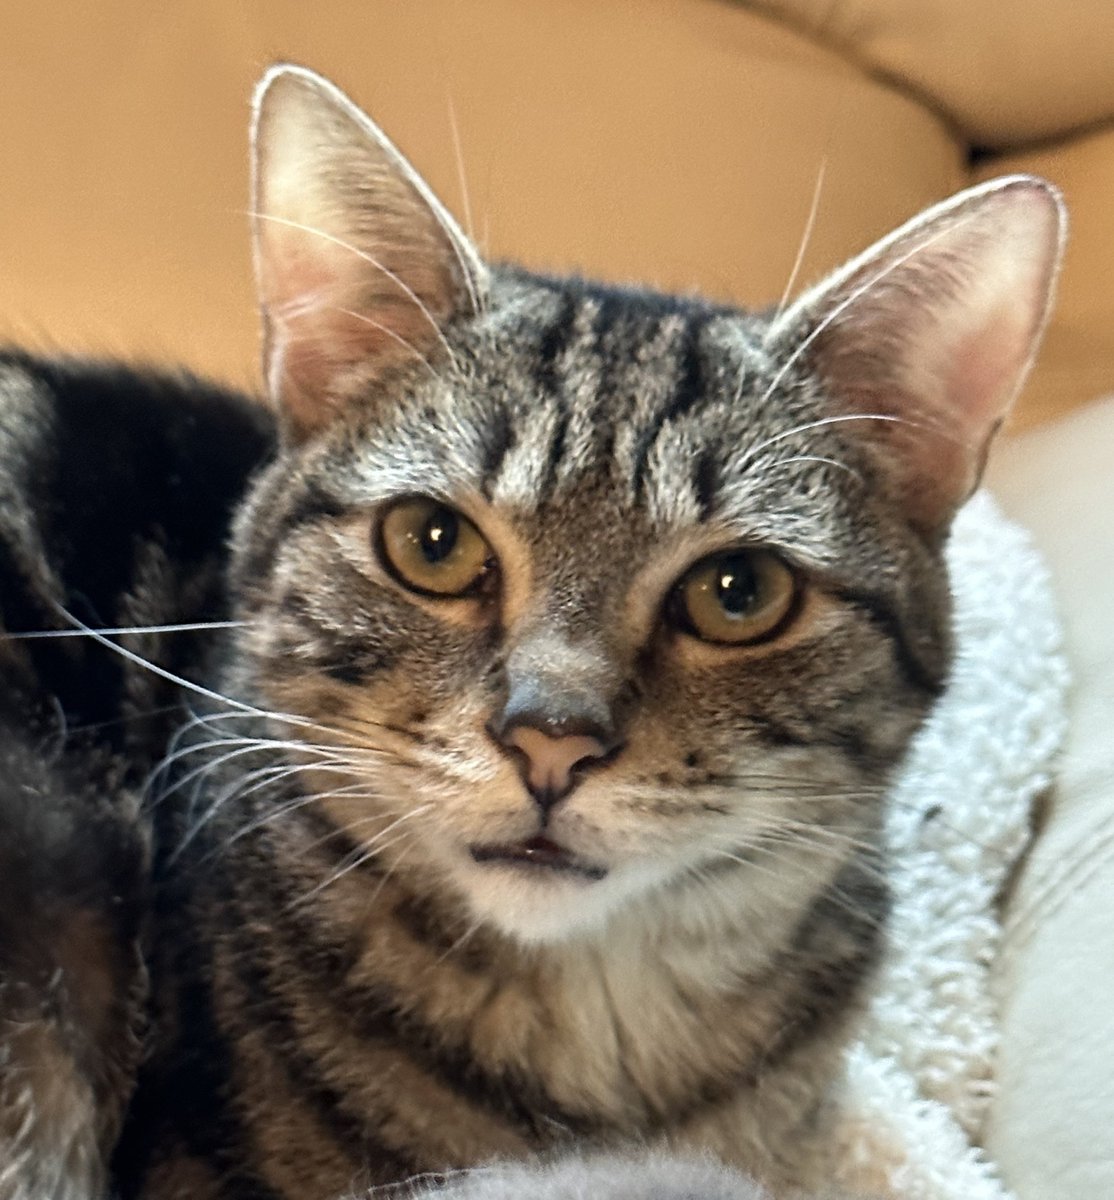 #SanJoaquin Co, CA: Hi, my name is BONNET! I was born in July 2022 and have a beautiful marbled #tabby coat. I love toys, especially wiggly strings! I've been waiting for my forever home since Sept 2022... adoptrescuecatsinca.com

#adoptable #California #cats #Lodi #Caturday